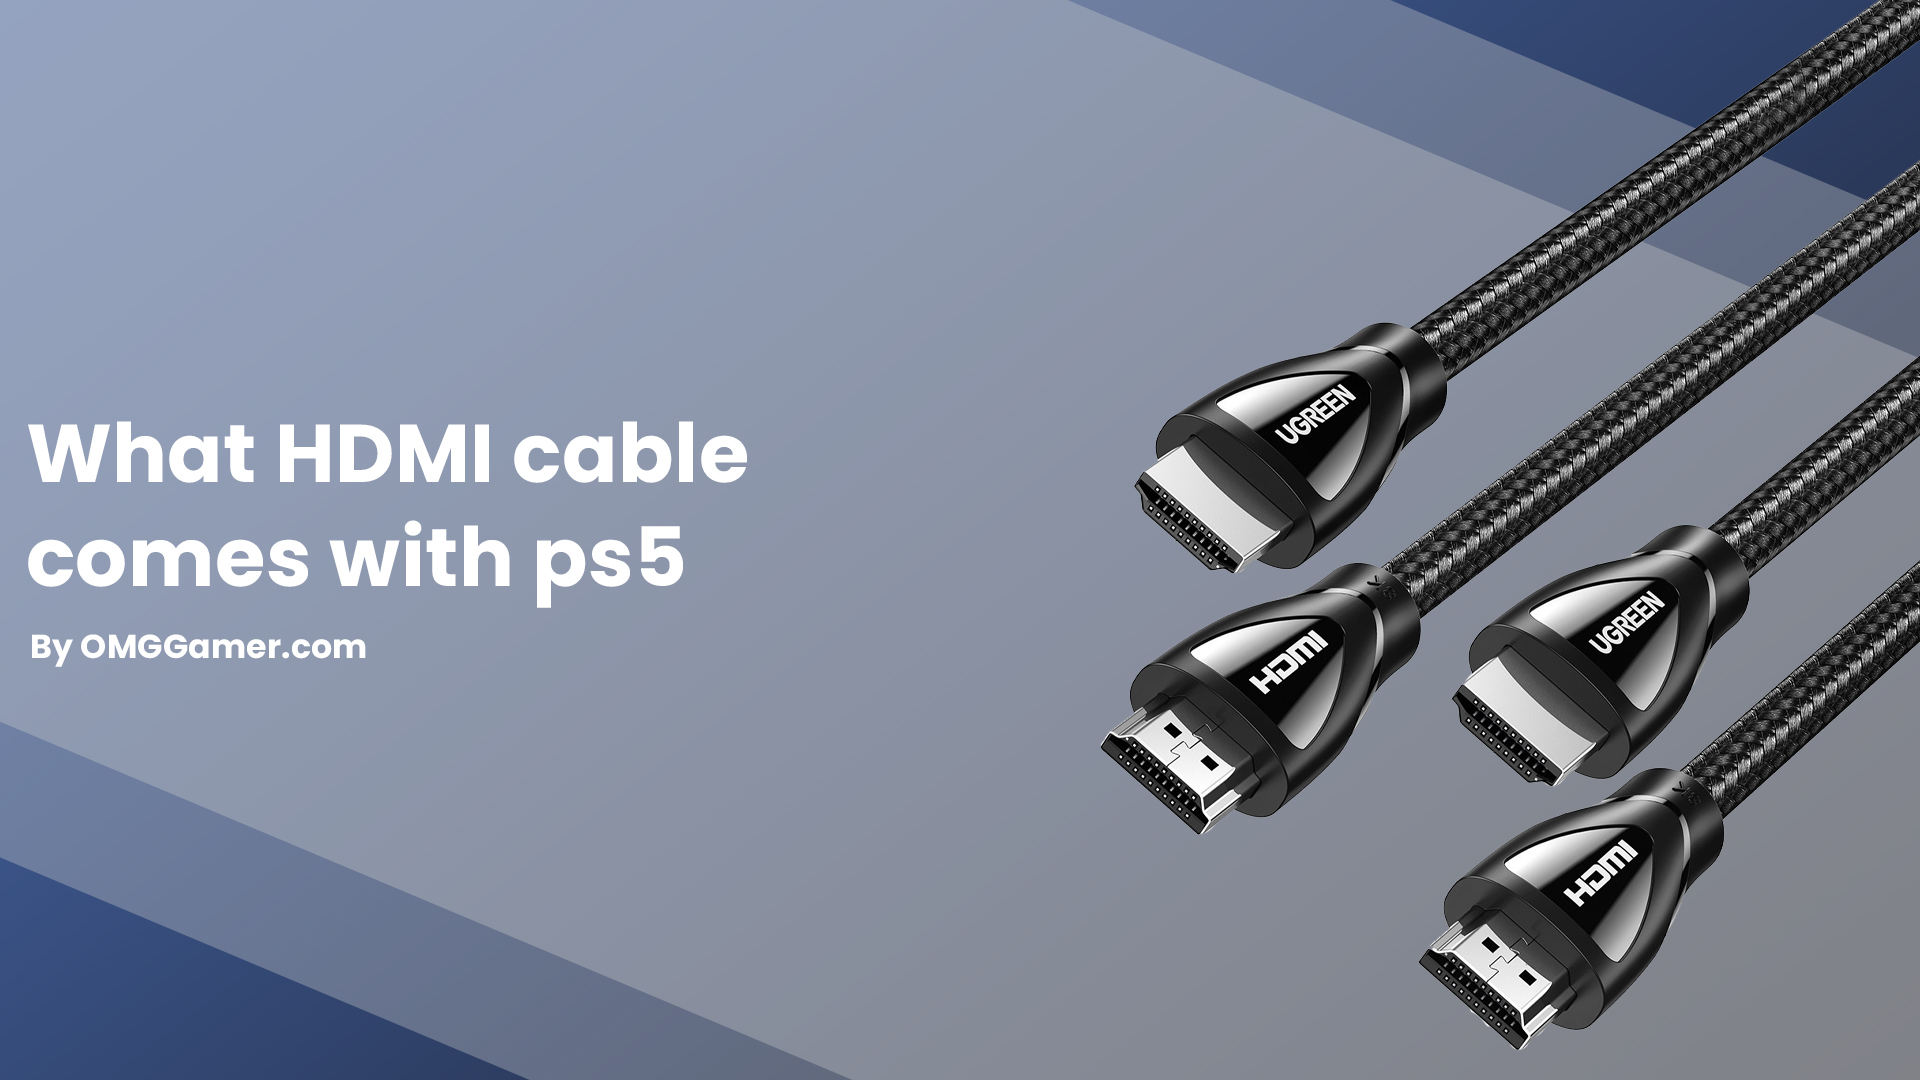 What HDMI cable comes with ps5